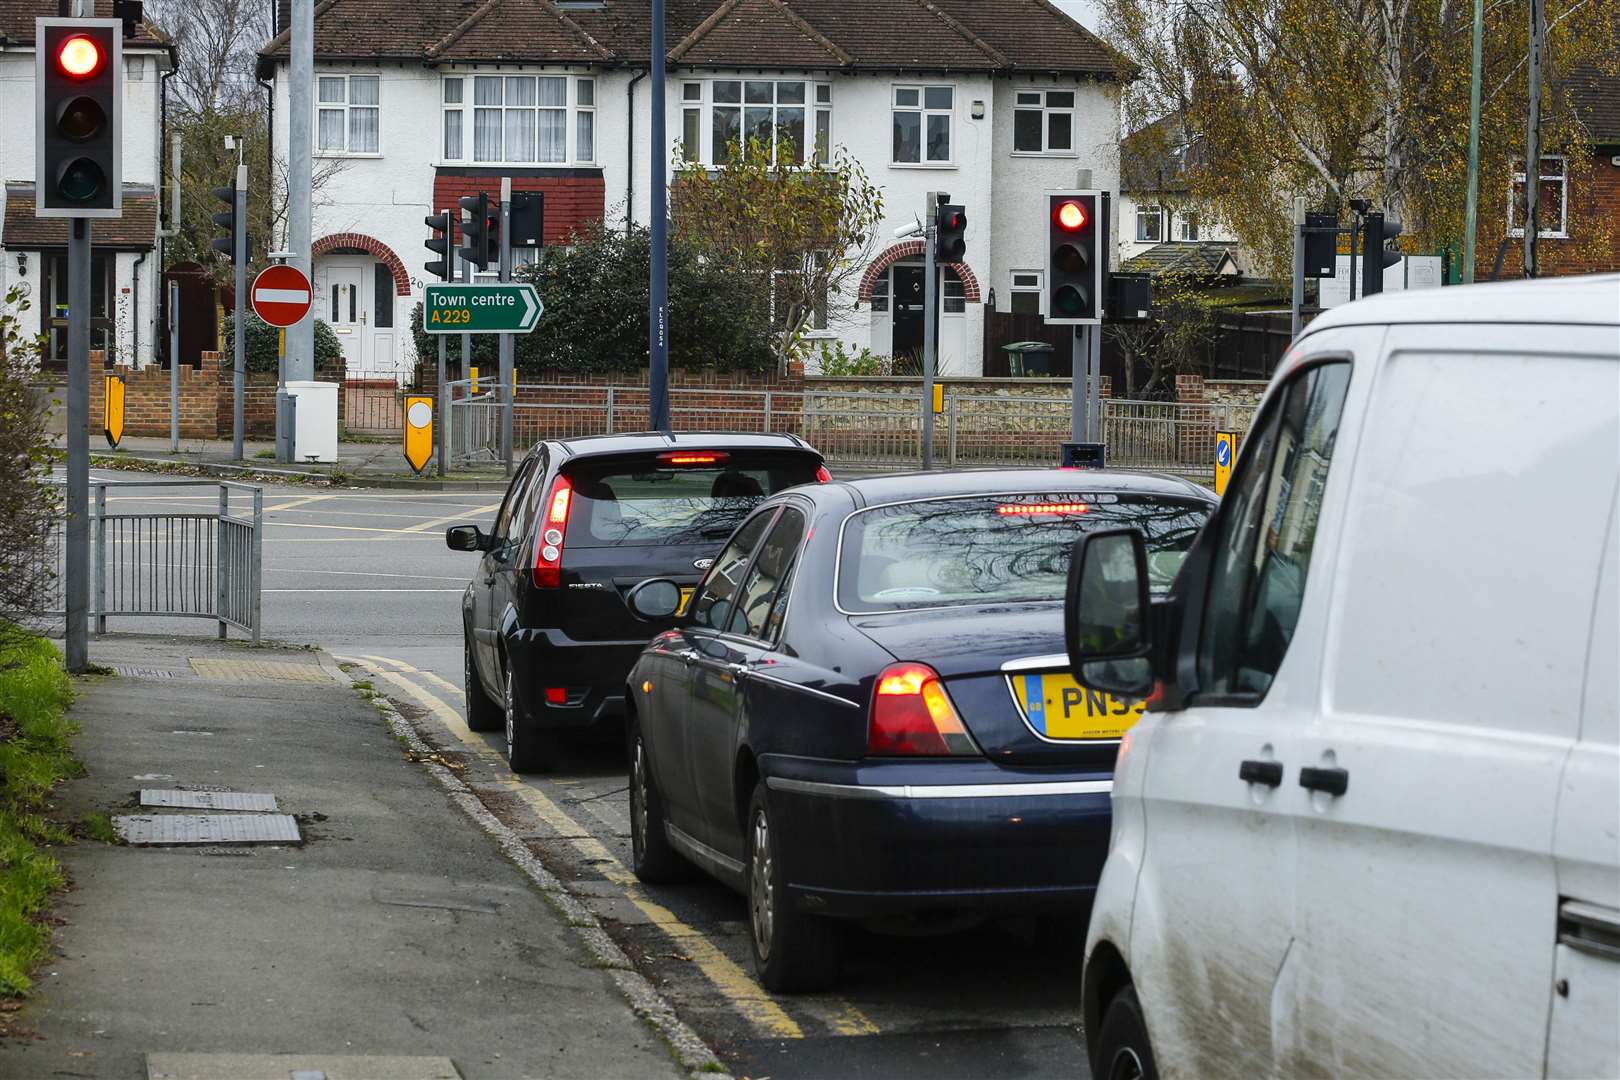 Cranborne Avenue is to close for up to 18 months Picture: Martin Apps